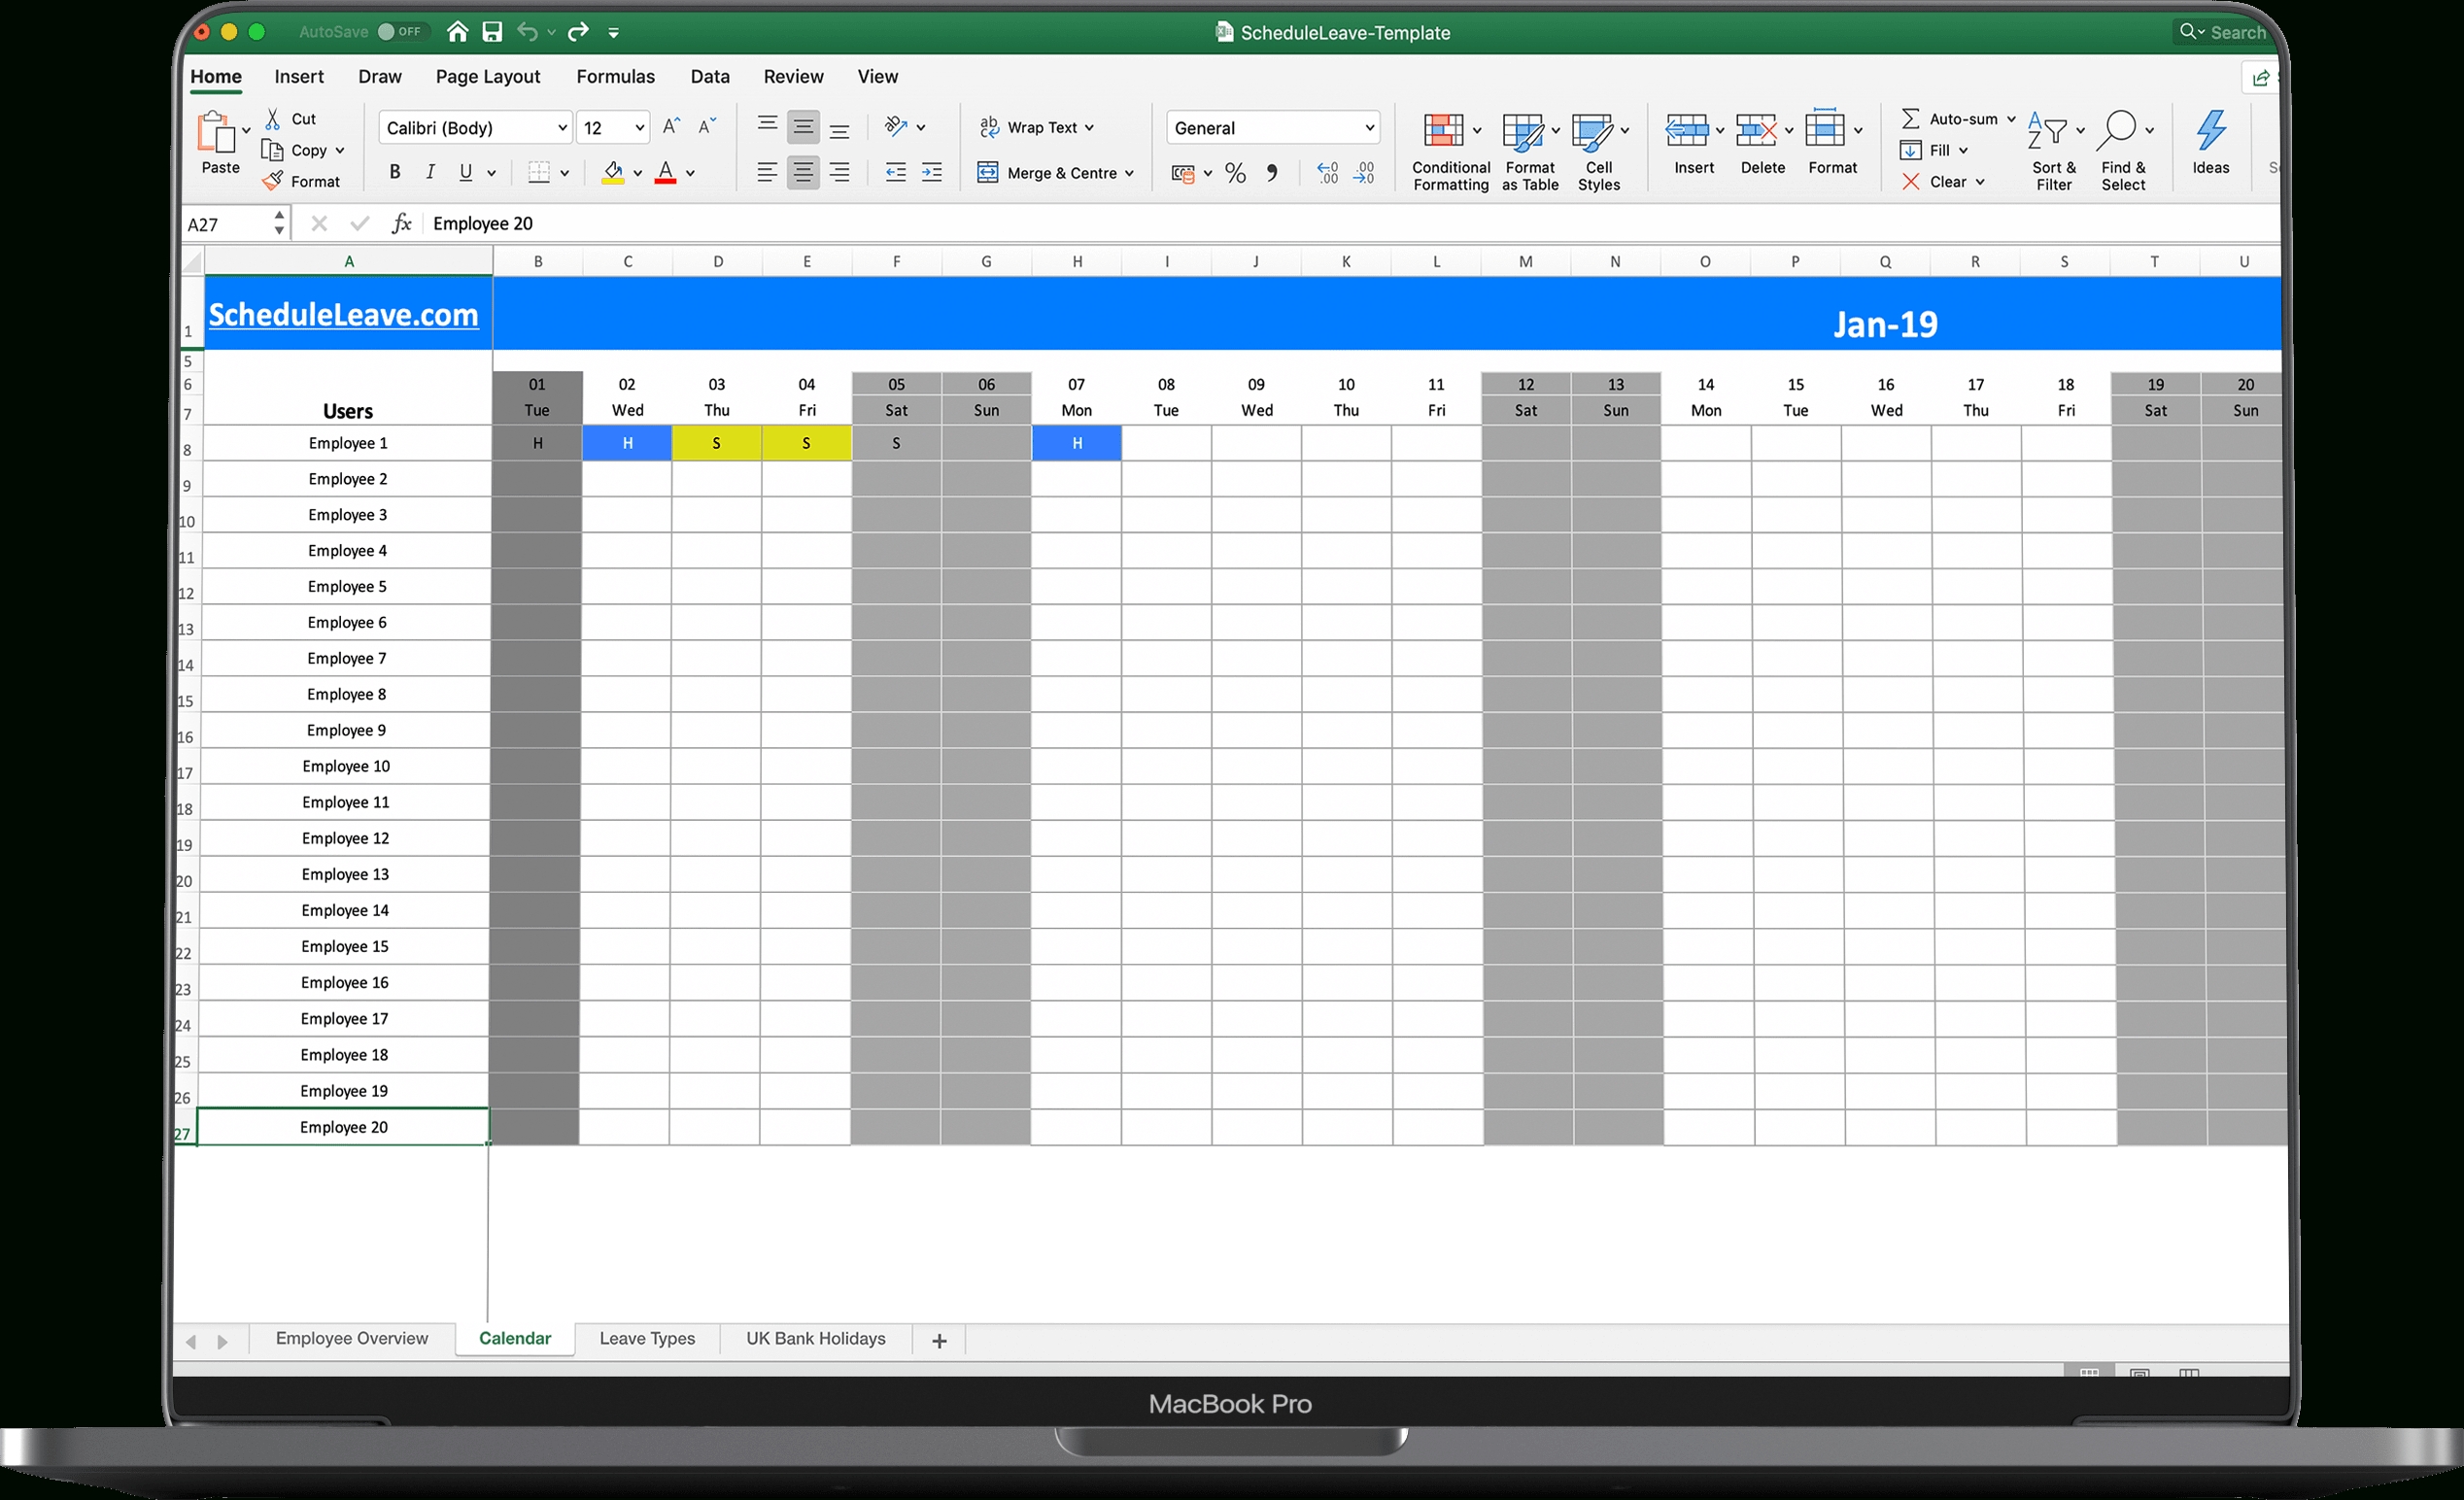 Free Excel Leave Calendar 2021 Spreadsheet Template-2021 Vacation Schedule Template Excel